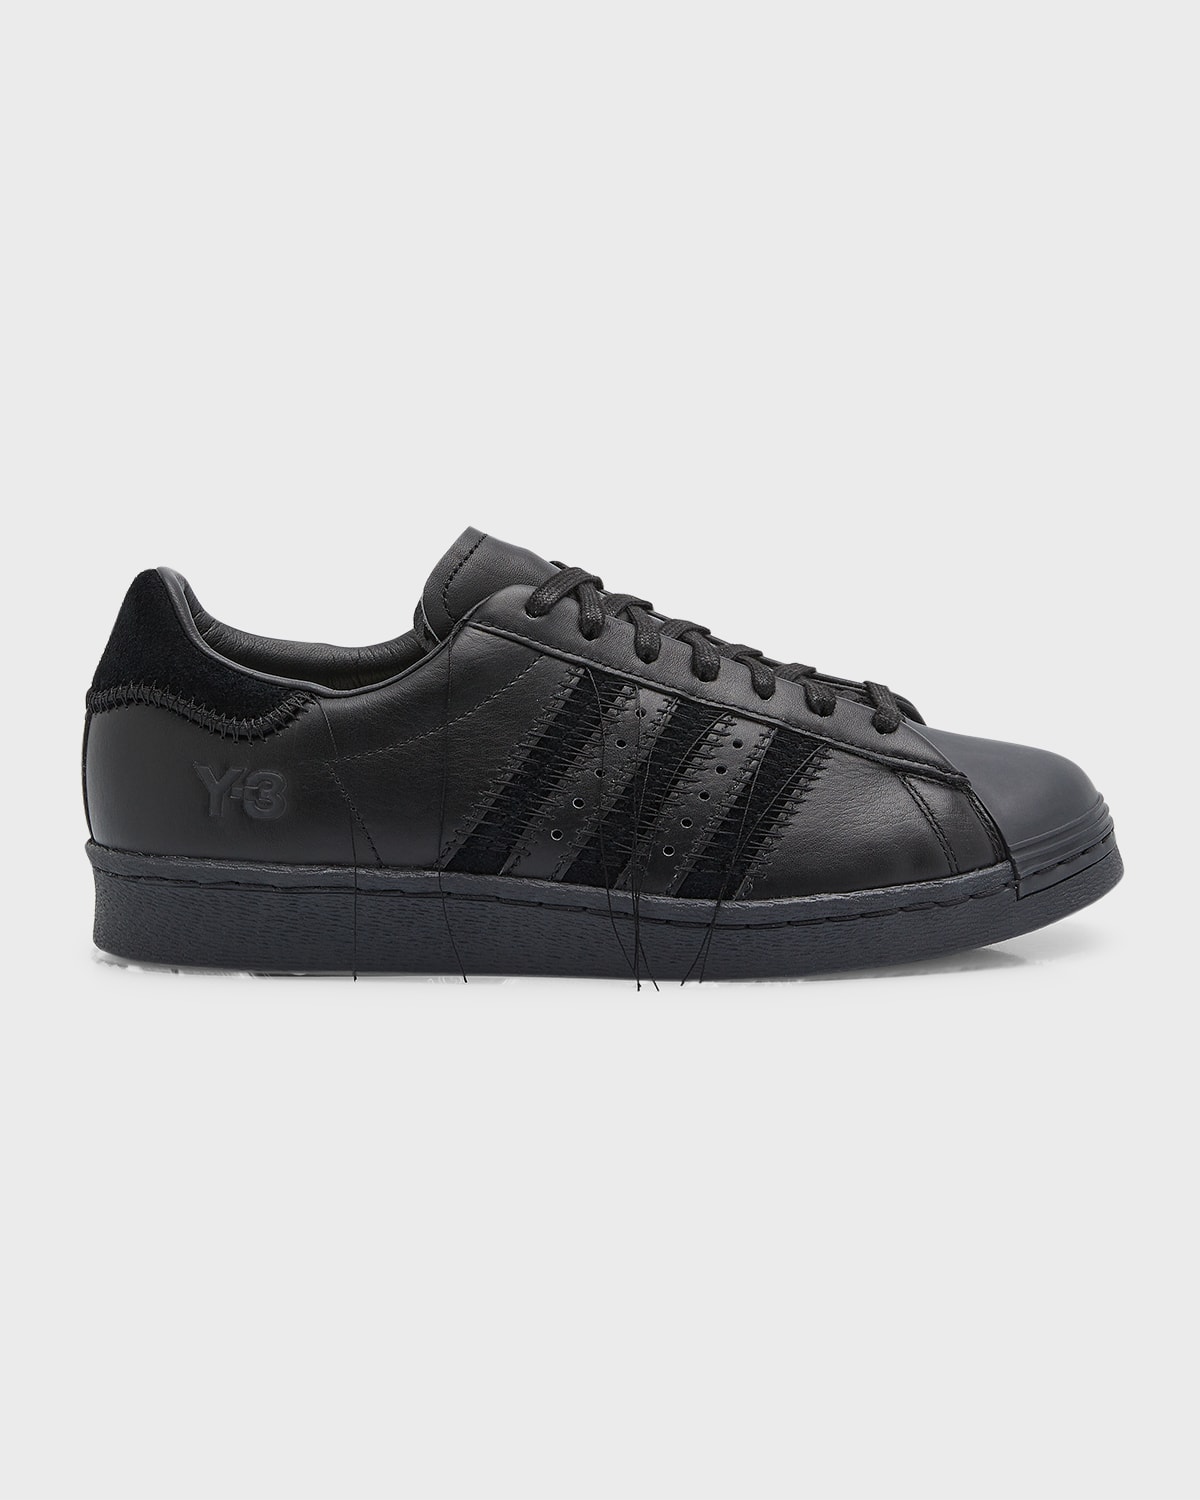 Men's Superstar Topstitched Leather Sneakers